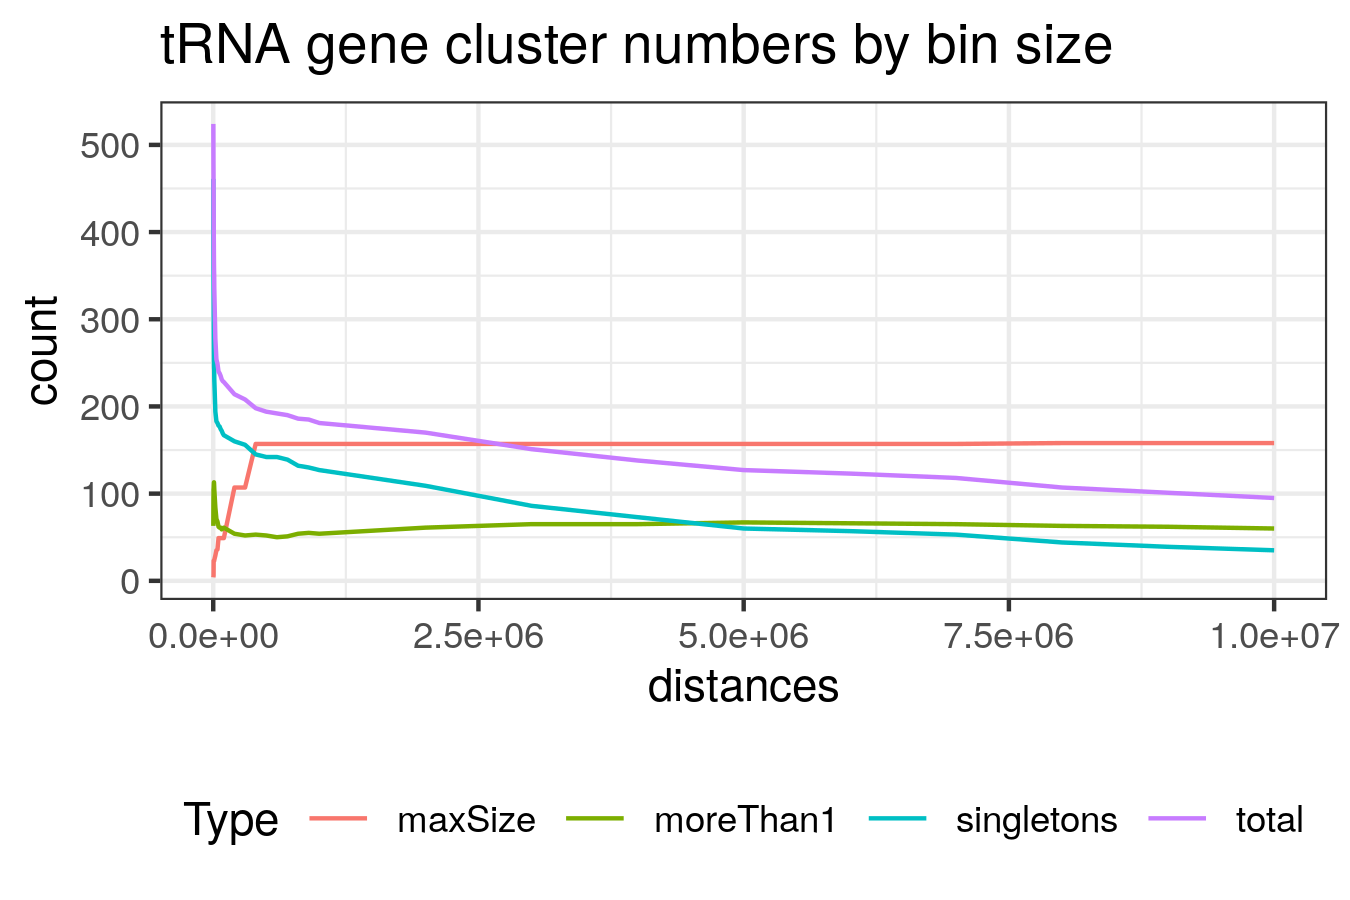 tRNA gene cluster numbers at different bin sizes total: total number of tRNA clusters. singletons: number of tRNAs in clusters alone. moreThan1: number of tRNAs in clusters with more than one tRNA. maxSize: the number of tRNAs in the largest cluster.